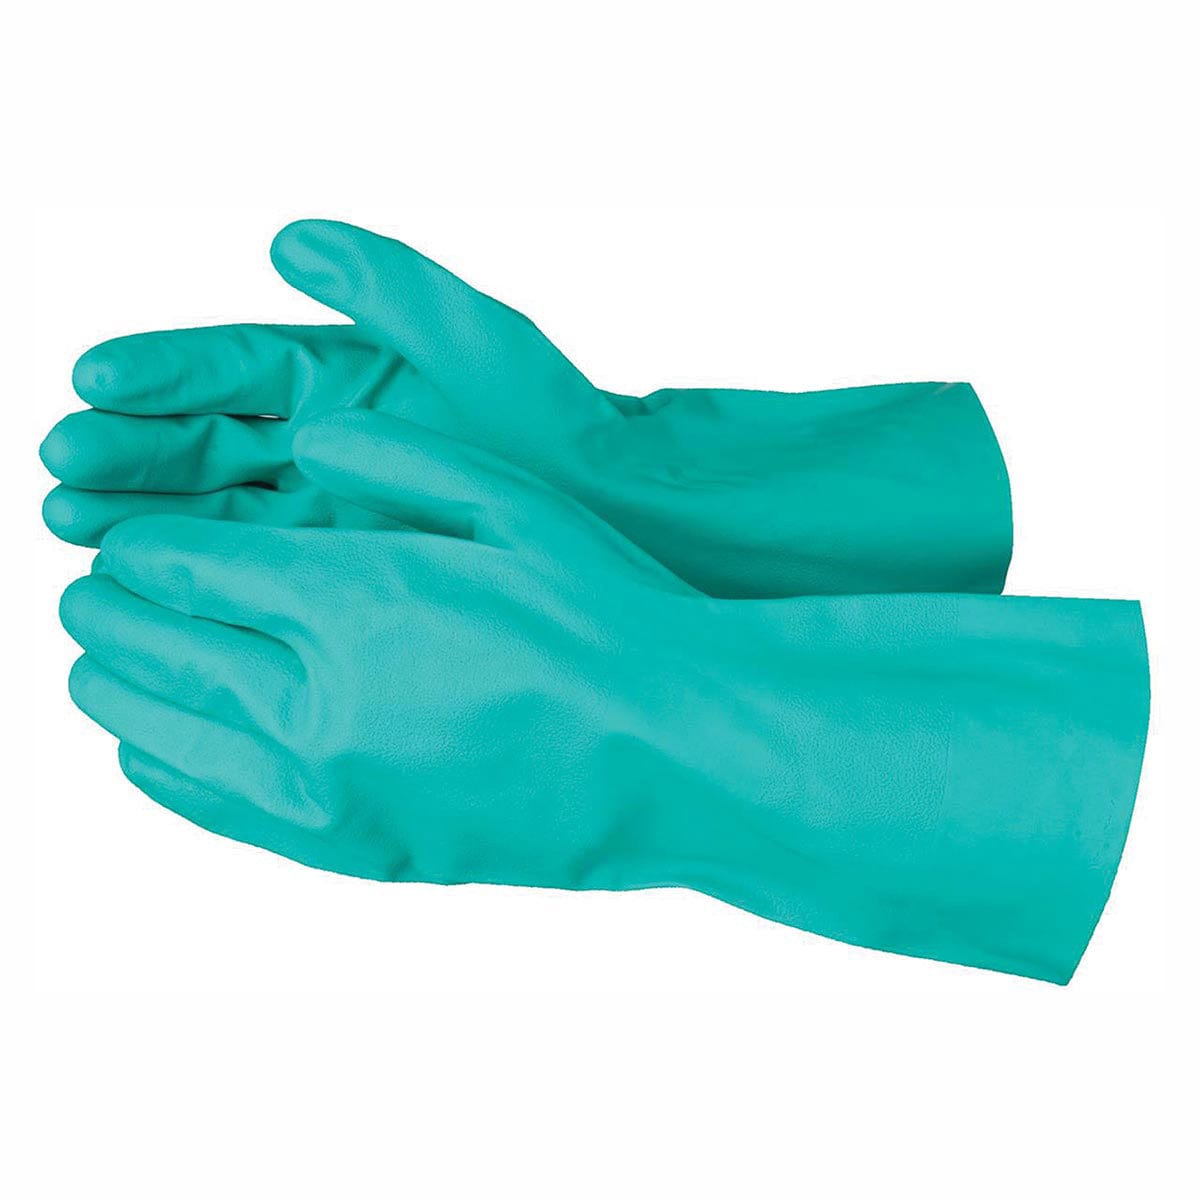 Gemplers 15-mil Chemical Resistant Unlined Nitrile Gloves | Bucket of 48 Pairs